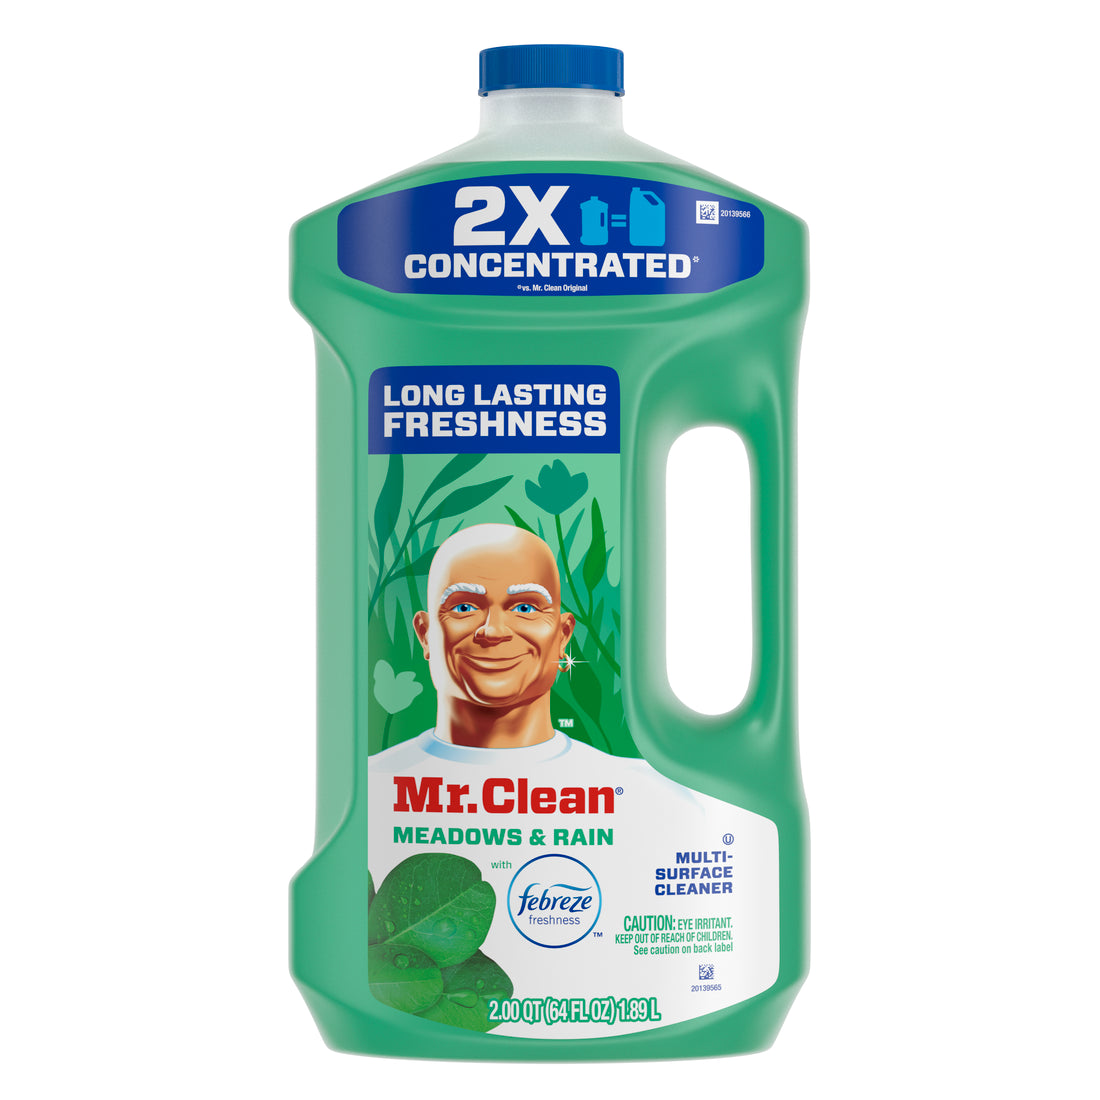 Mr. Clean 2X Concentrated Multi Surface Cleaner with Febreze Meadows & Rain Scent - 64oz/4pk